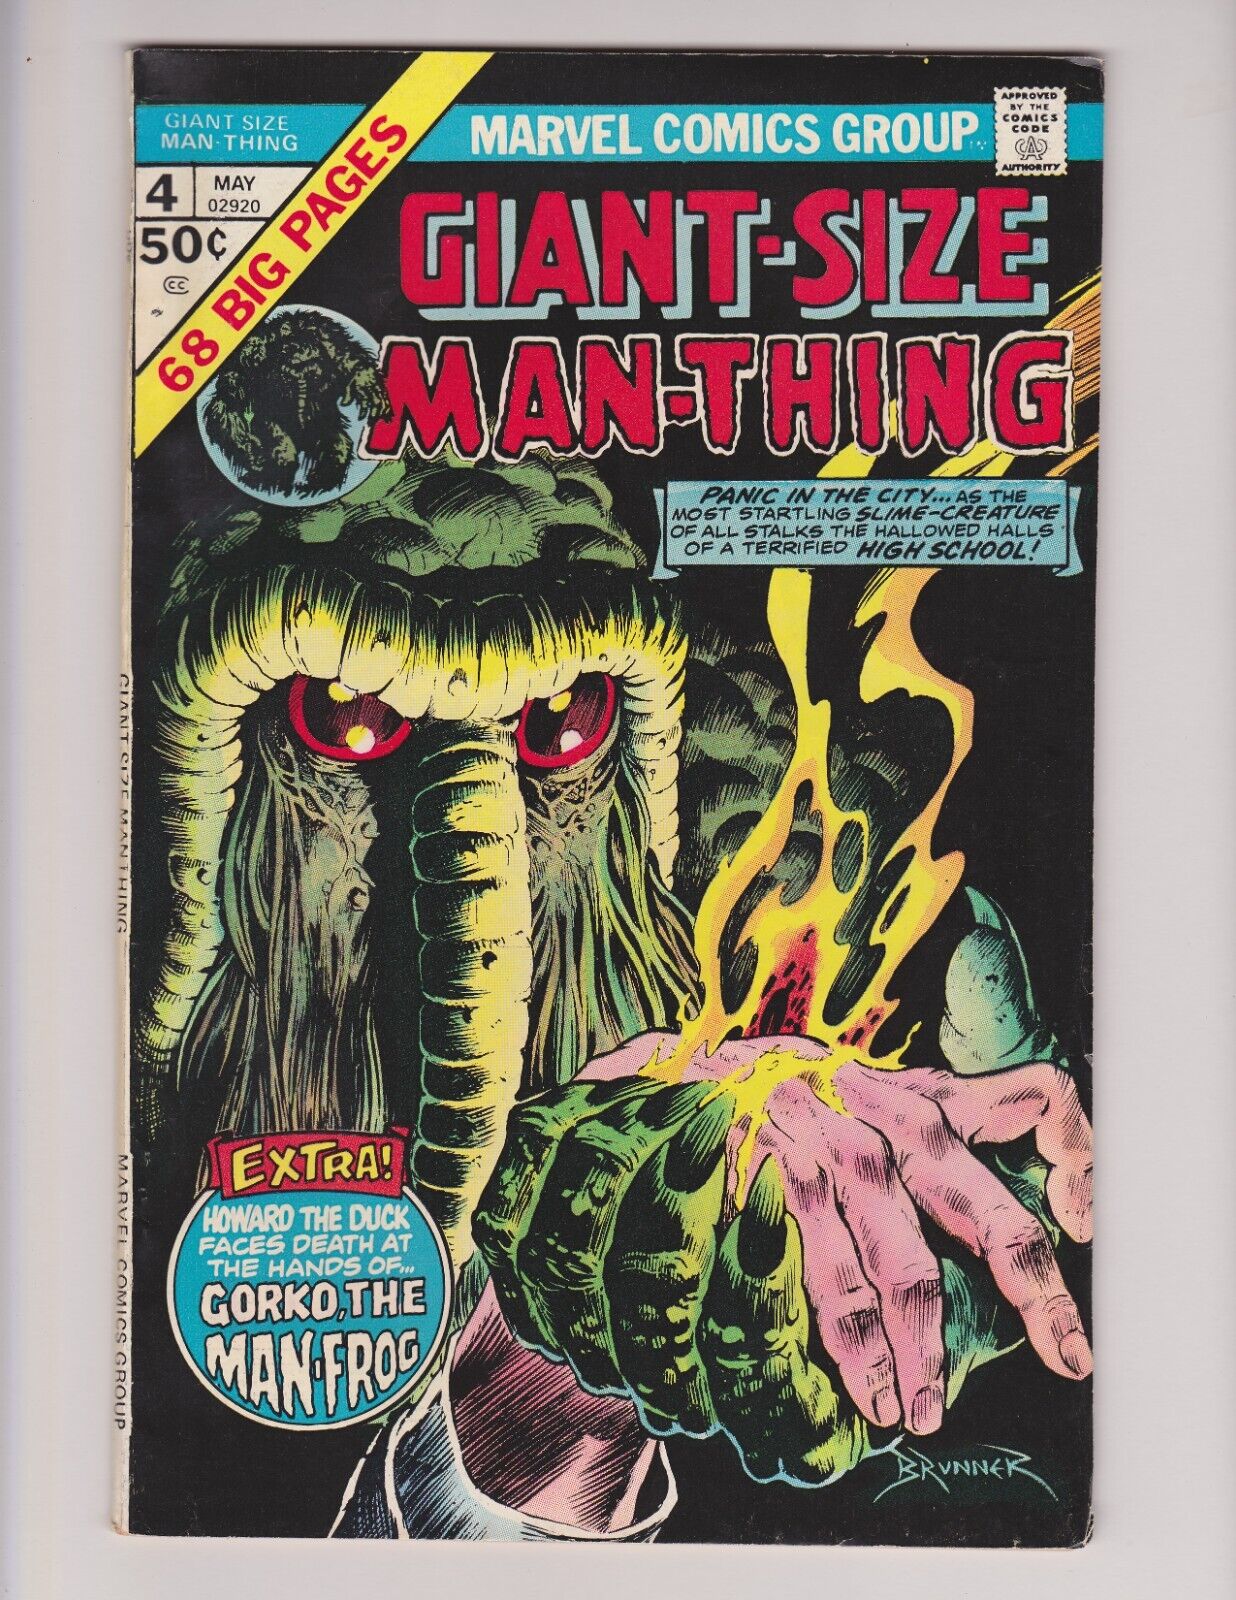 GIANT SIZE MAN THING #4 MARVEL 1975 EARLY HOWARD THE DUCK APPEARANCE BRUNNER ART